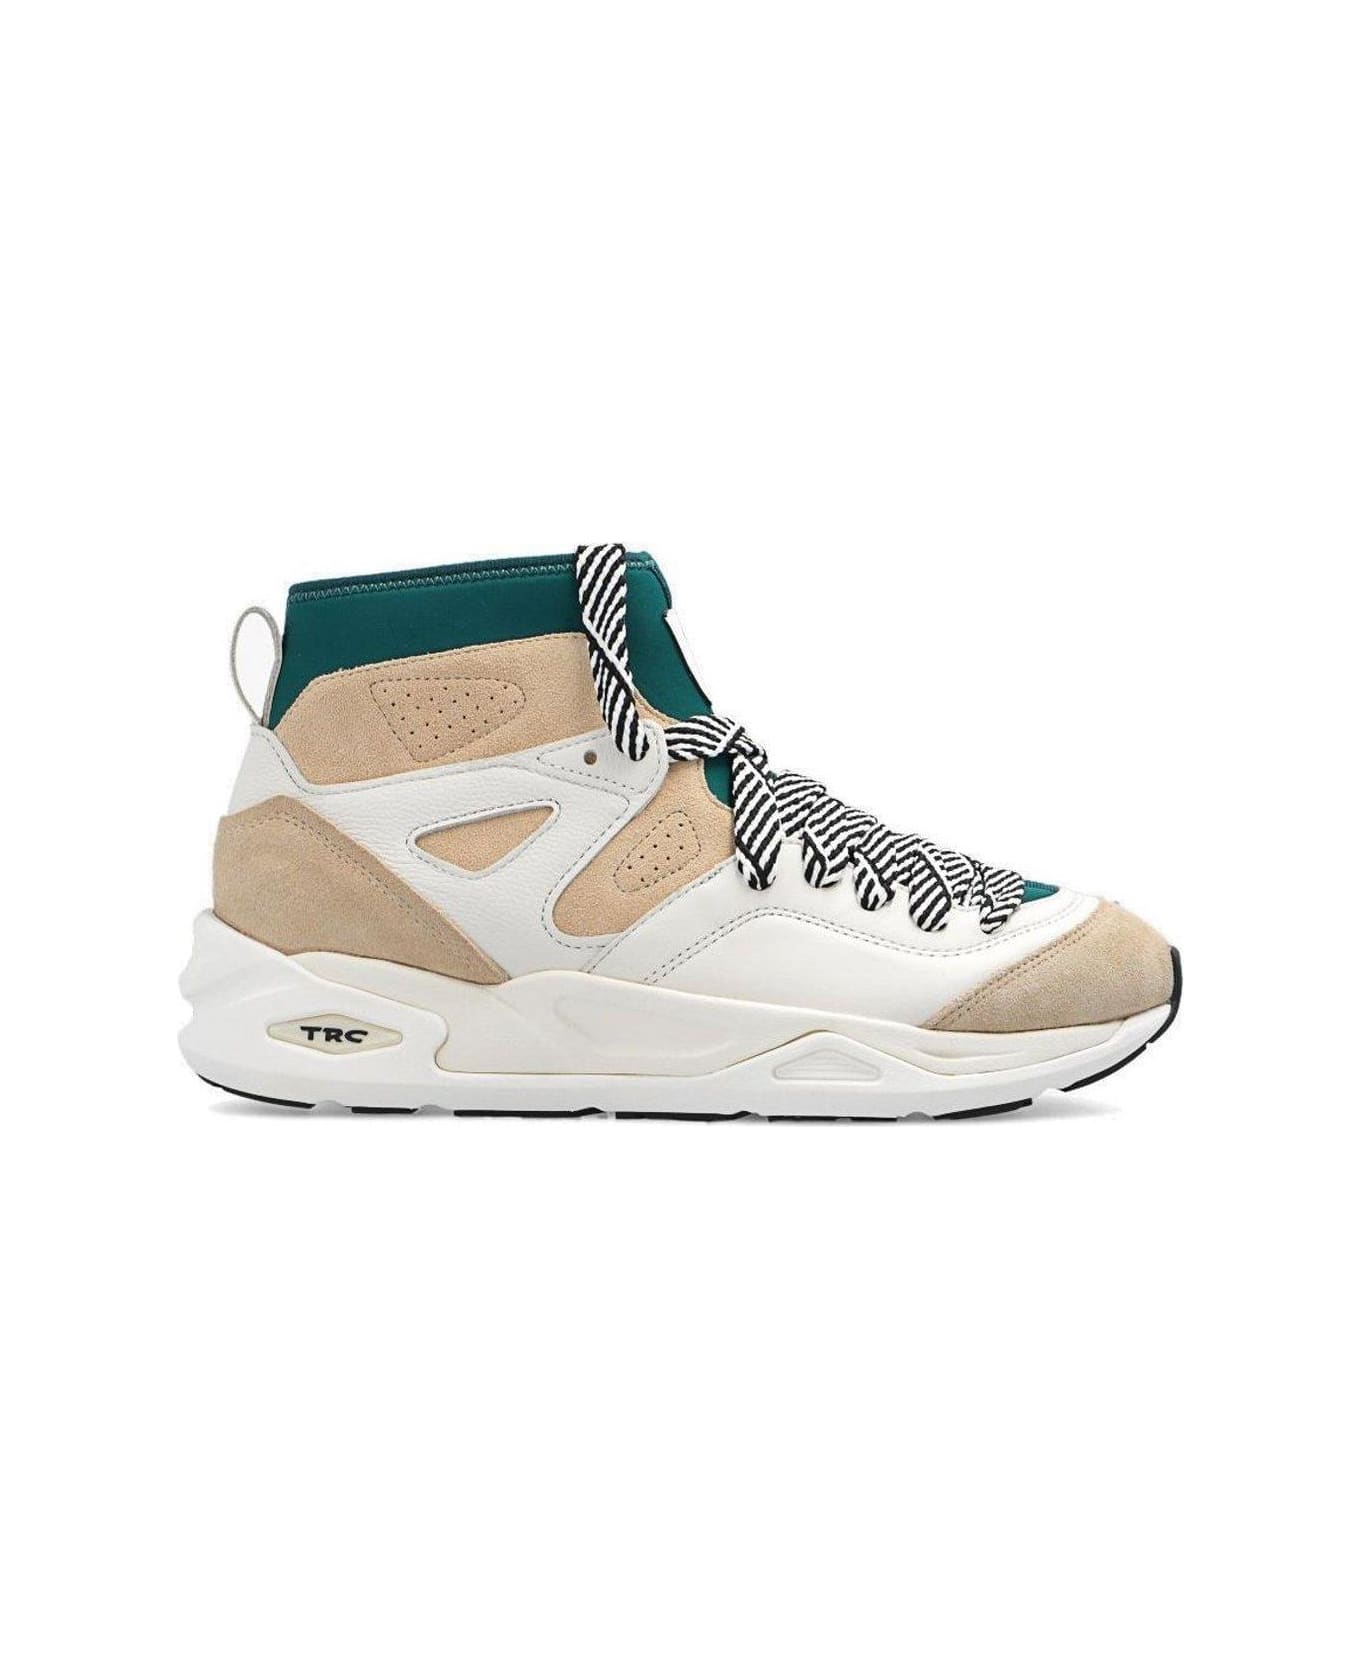 Puma X Ami Trc Blaze Mid Lace-up Sneakers - White スニーカー